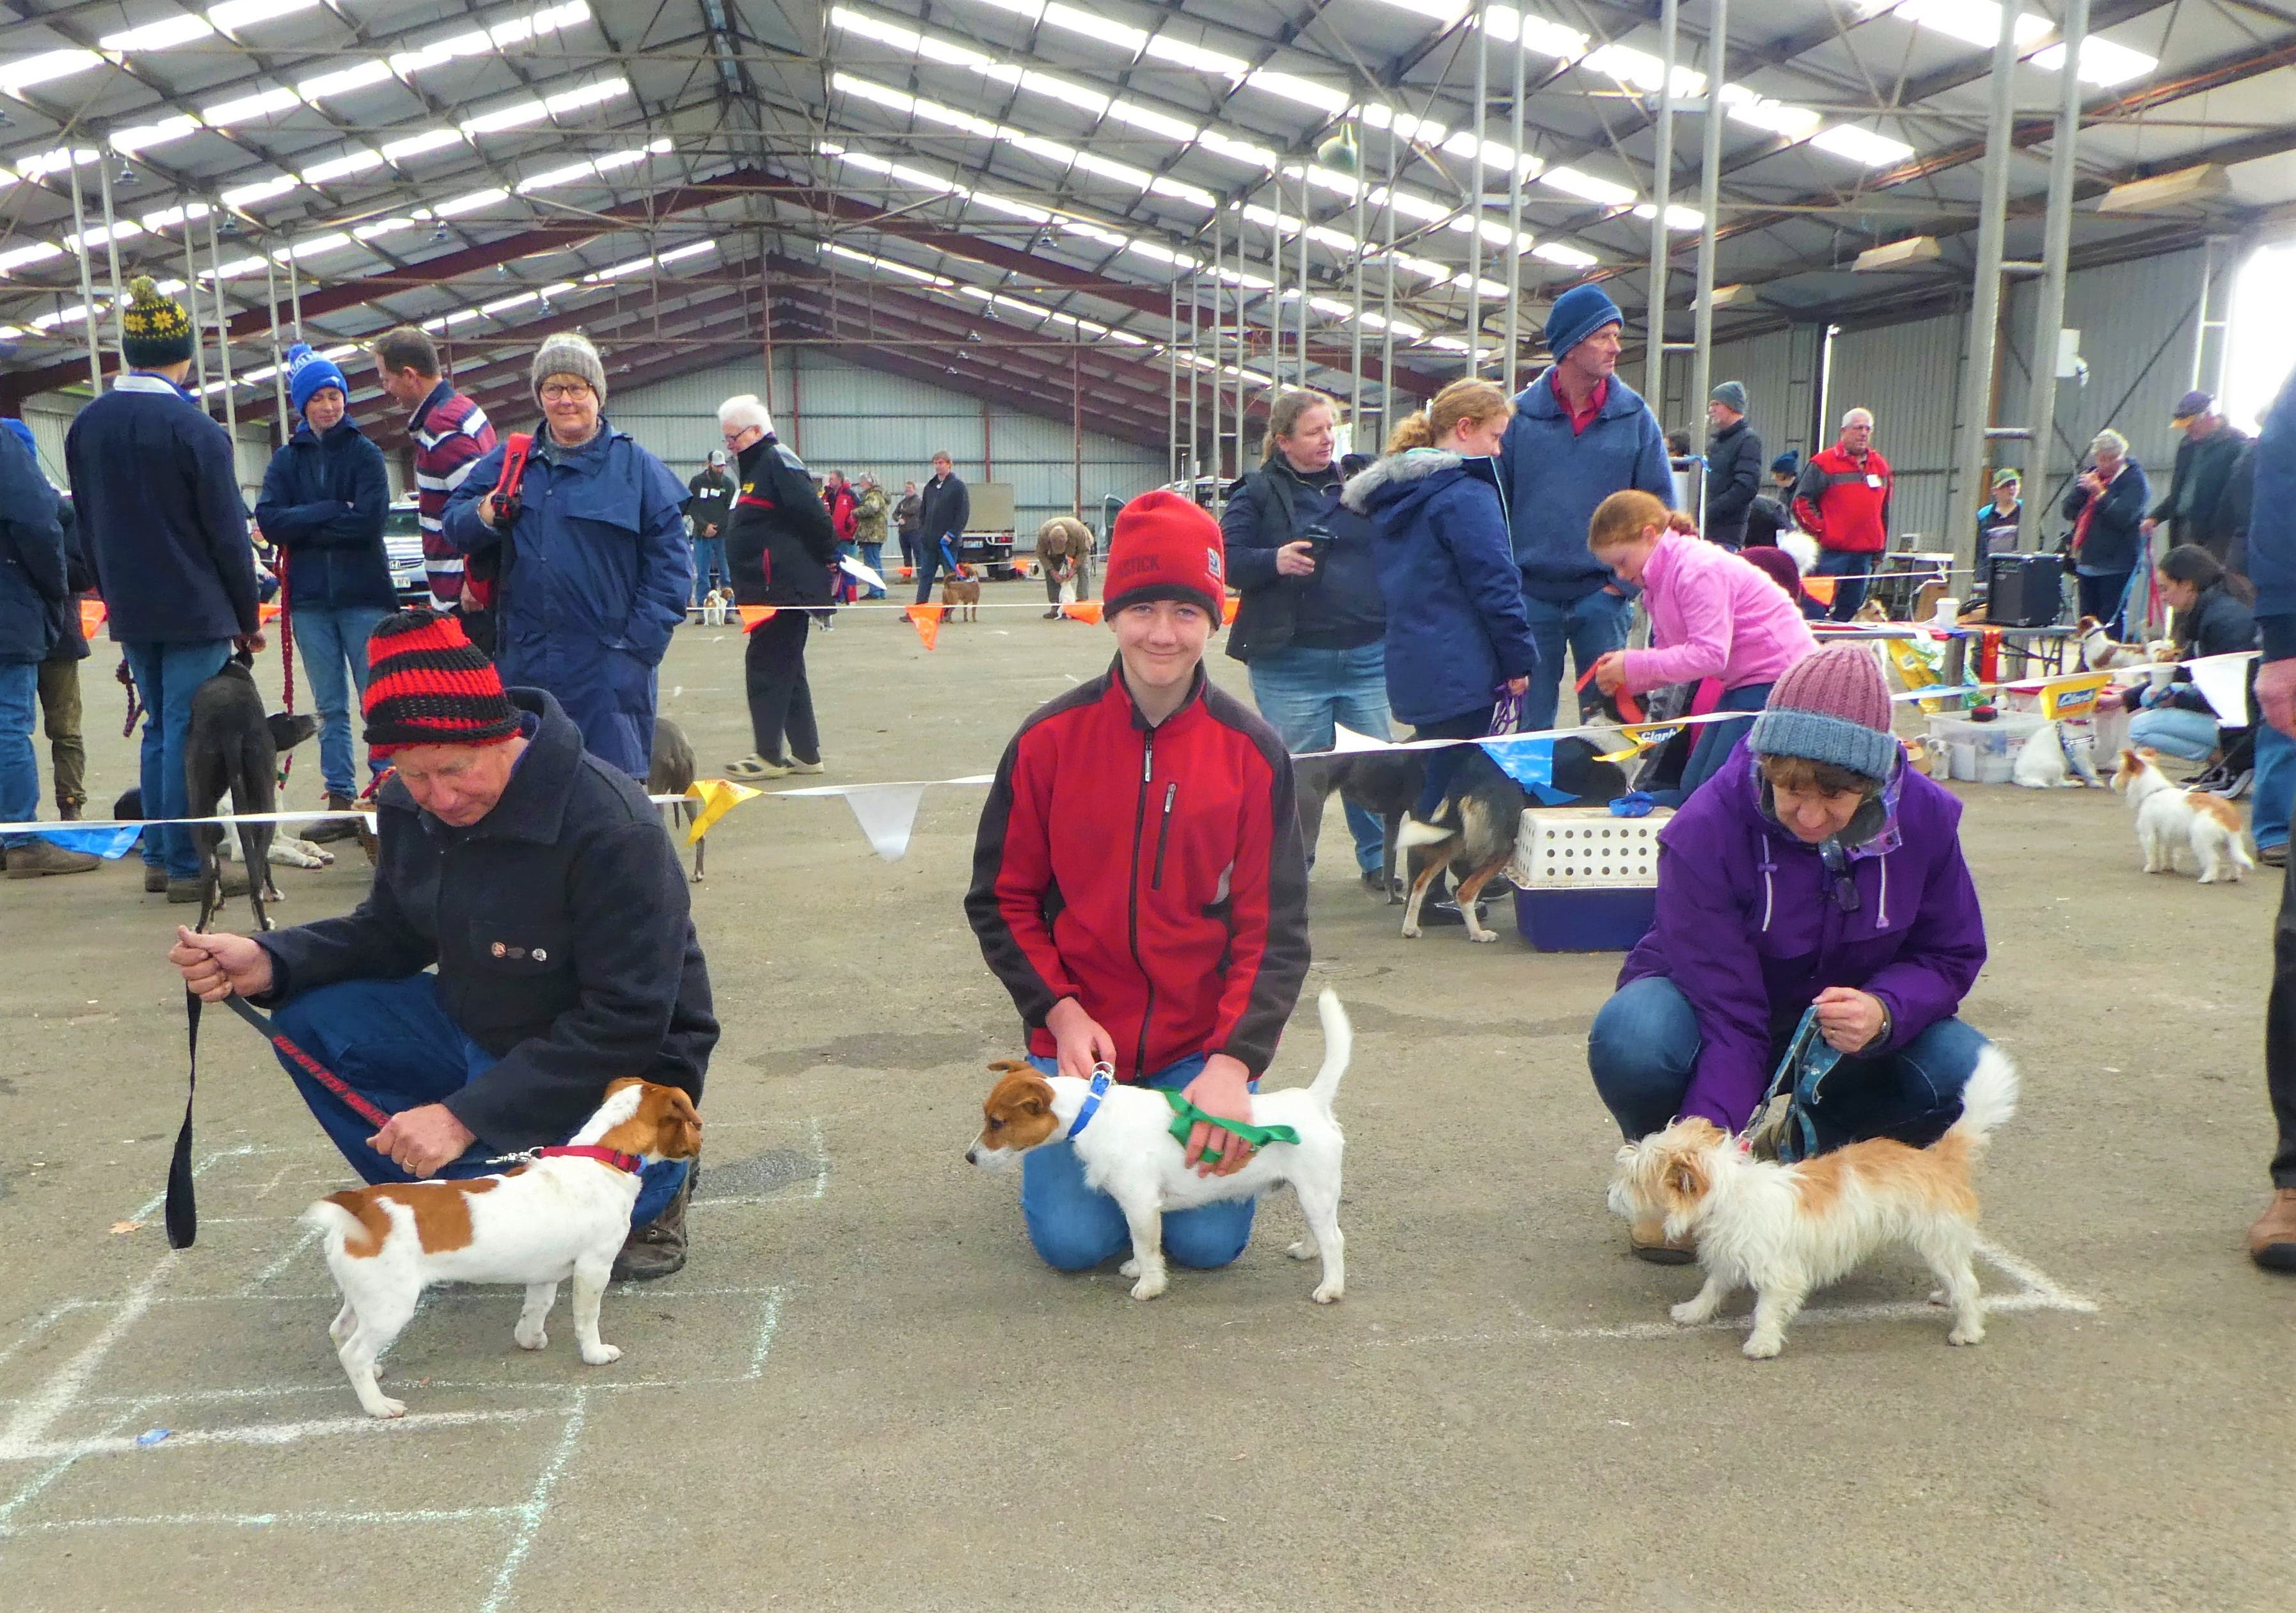 Hamilton Jack Russell Terrier and Hunting Dog Show - Melbourne Tourism